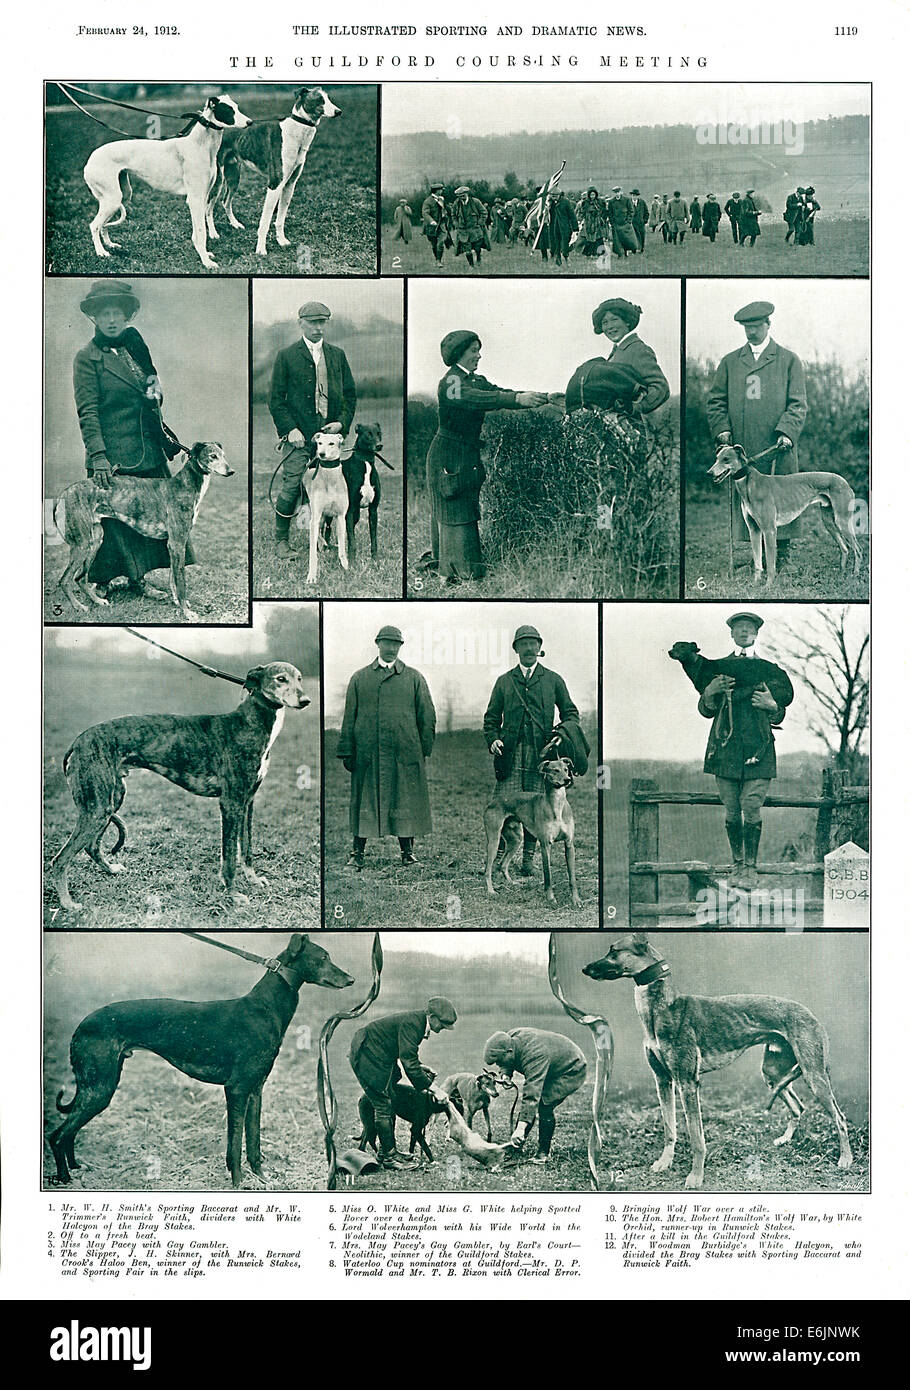 Guildford Coursing Meeting, 1912 magazine article on hare coursing with greyhounds in Surrey Stock Photo